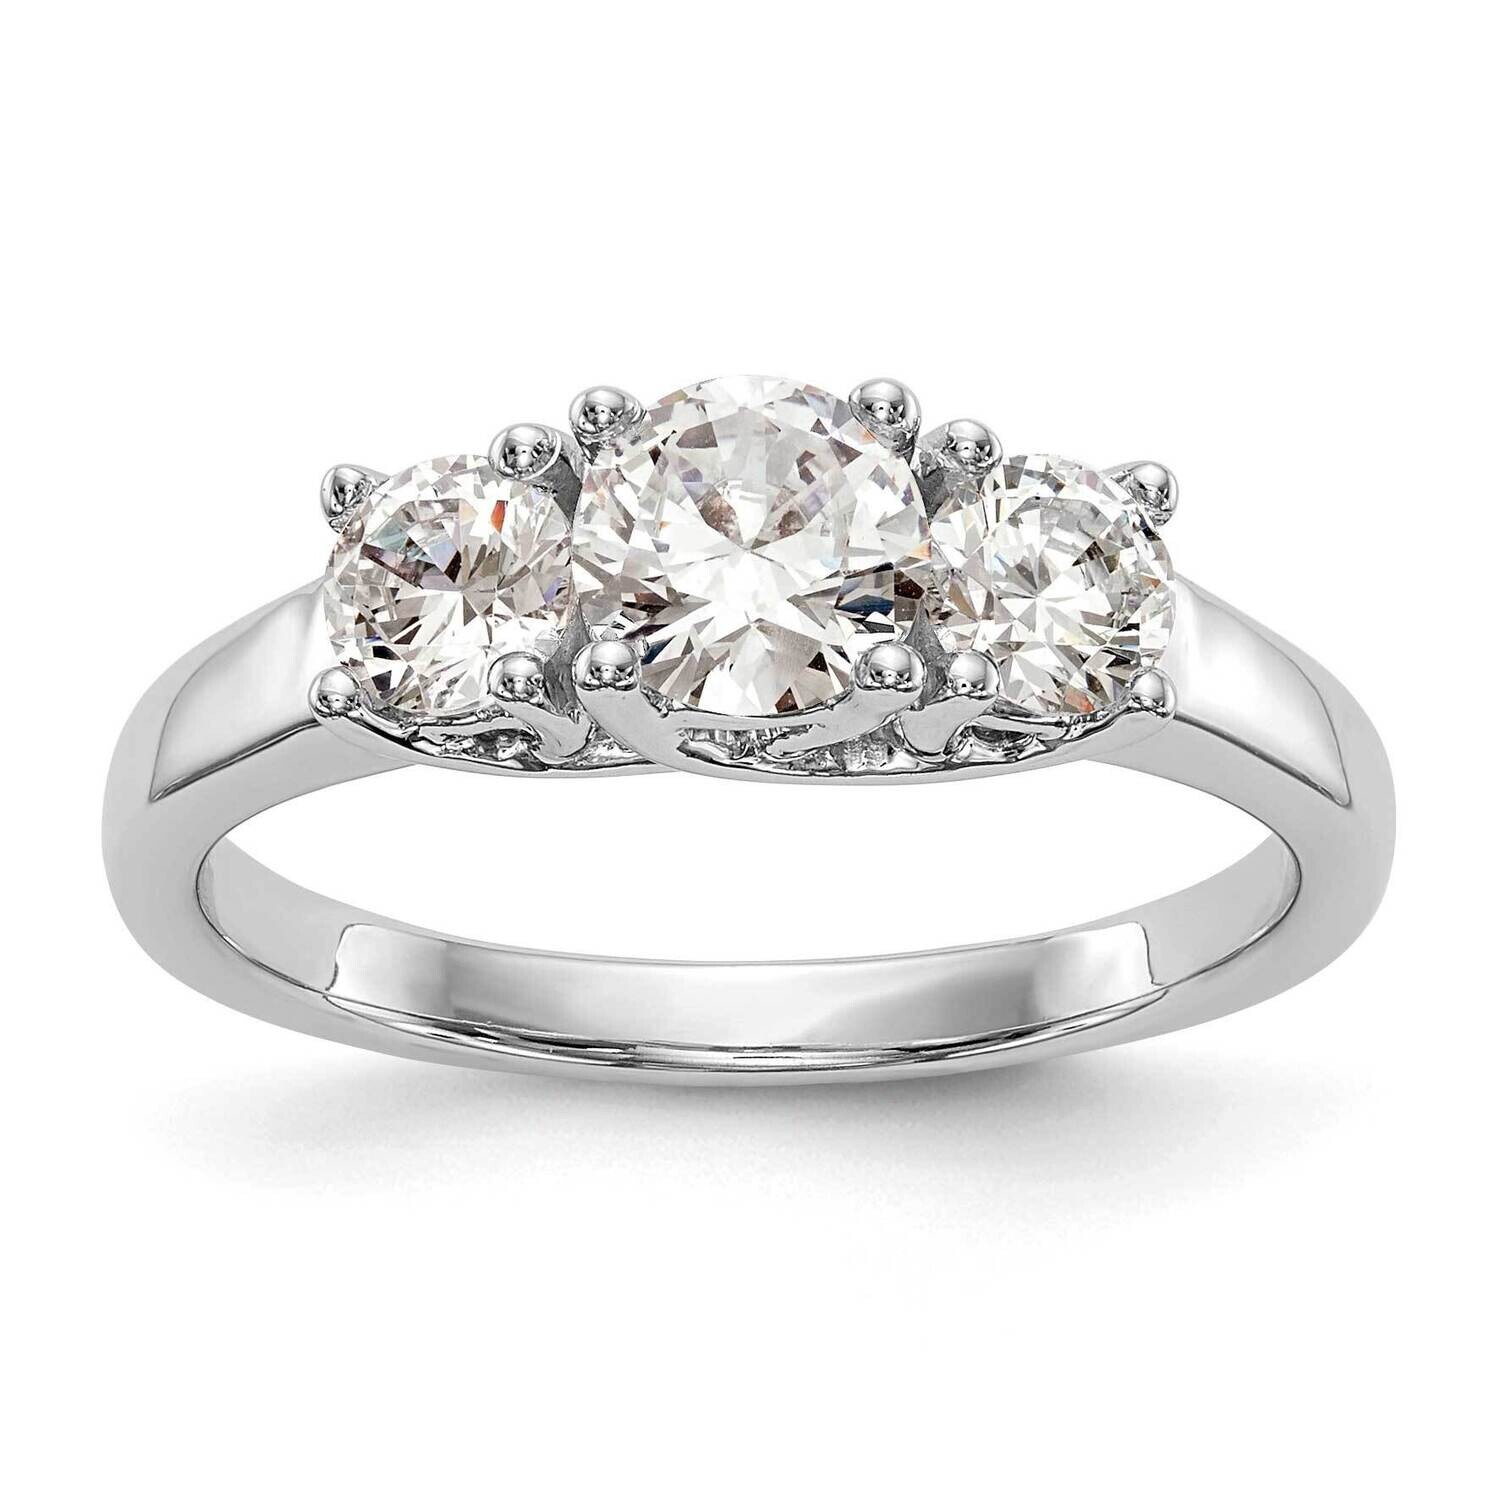 3-Stone Holds 1/2 Carat 5.2mm Round Center 2-4.00mm Round Sides Engagement Ring Mounting 14k White Gold RM2952E-050-CWAA